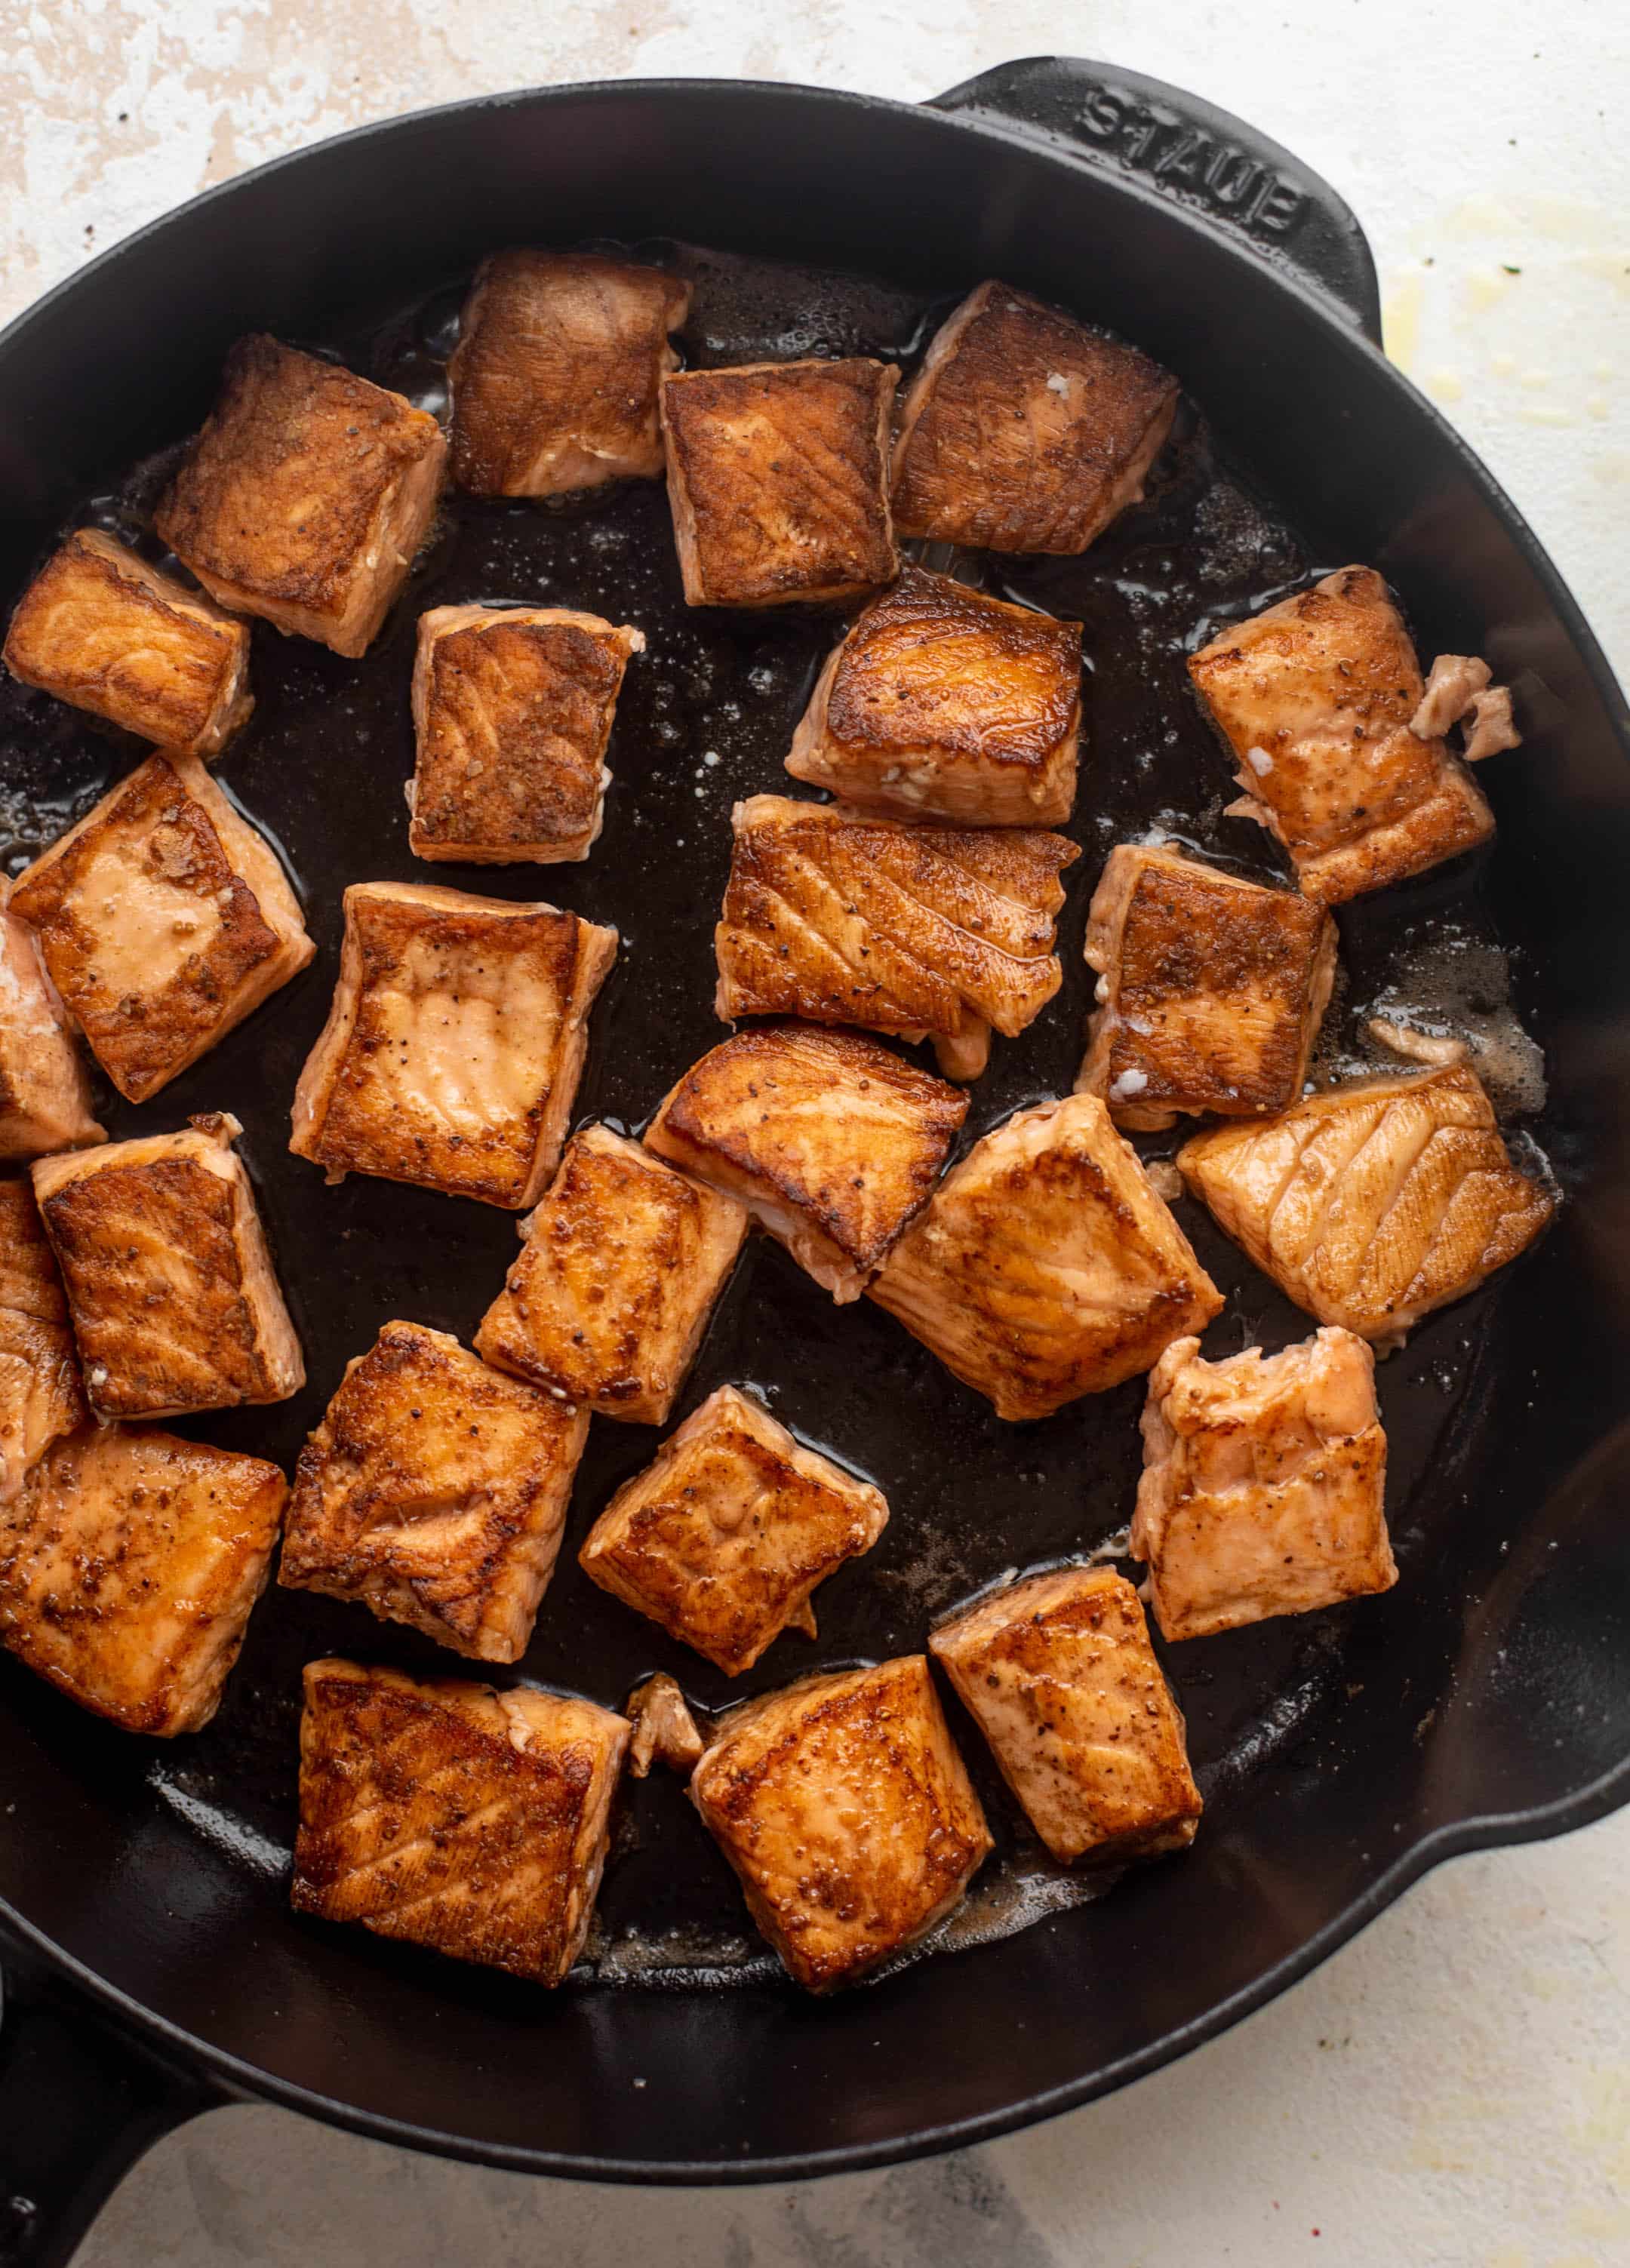 seared salmon in a cast iron skillet